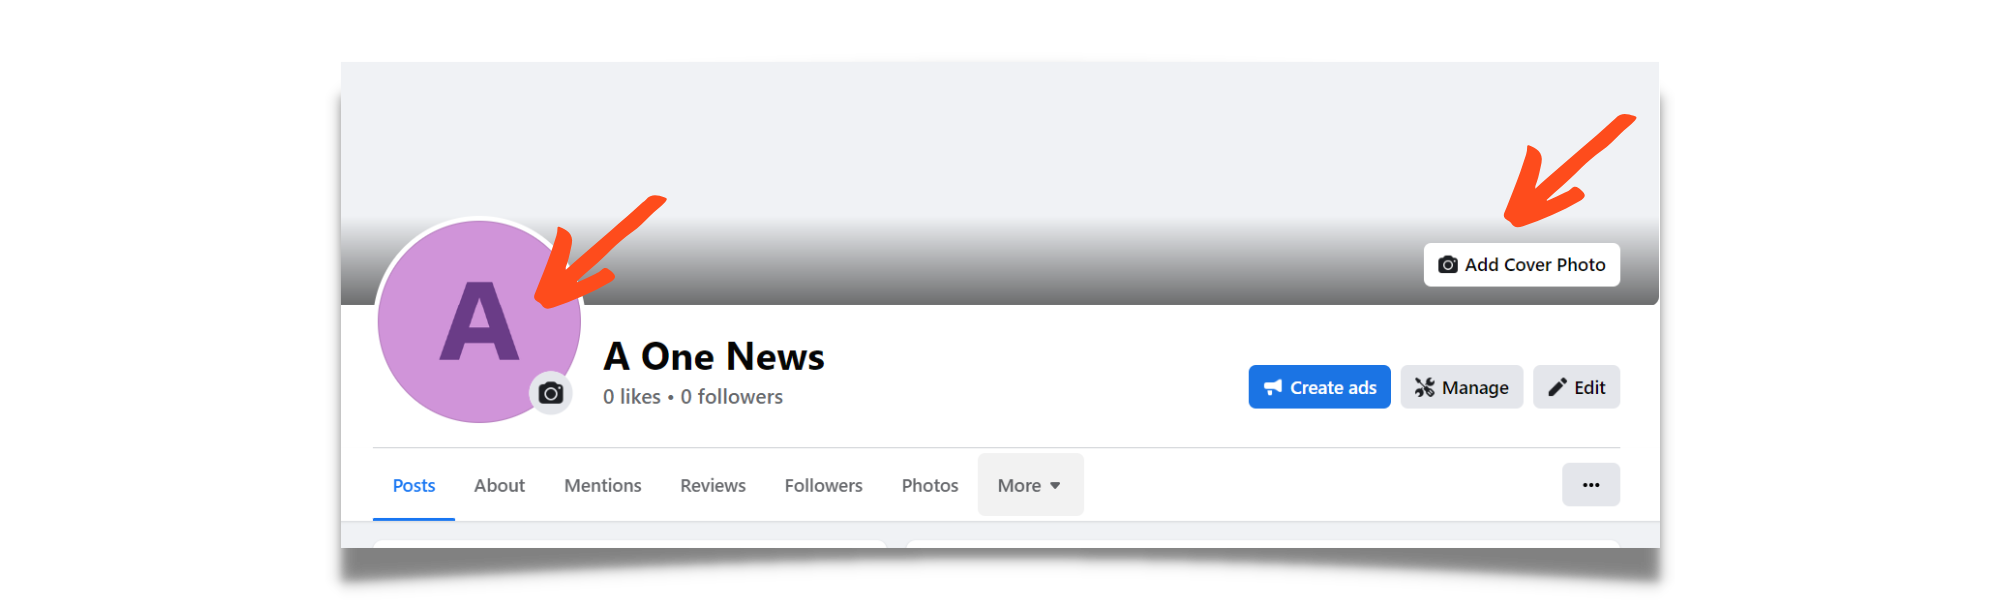 Facebook Page for News Portal